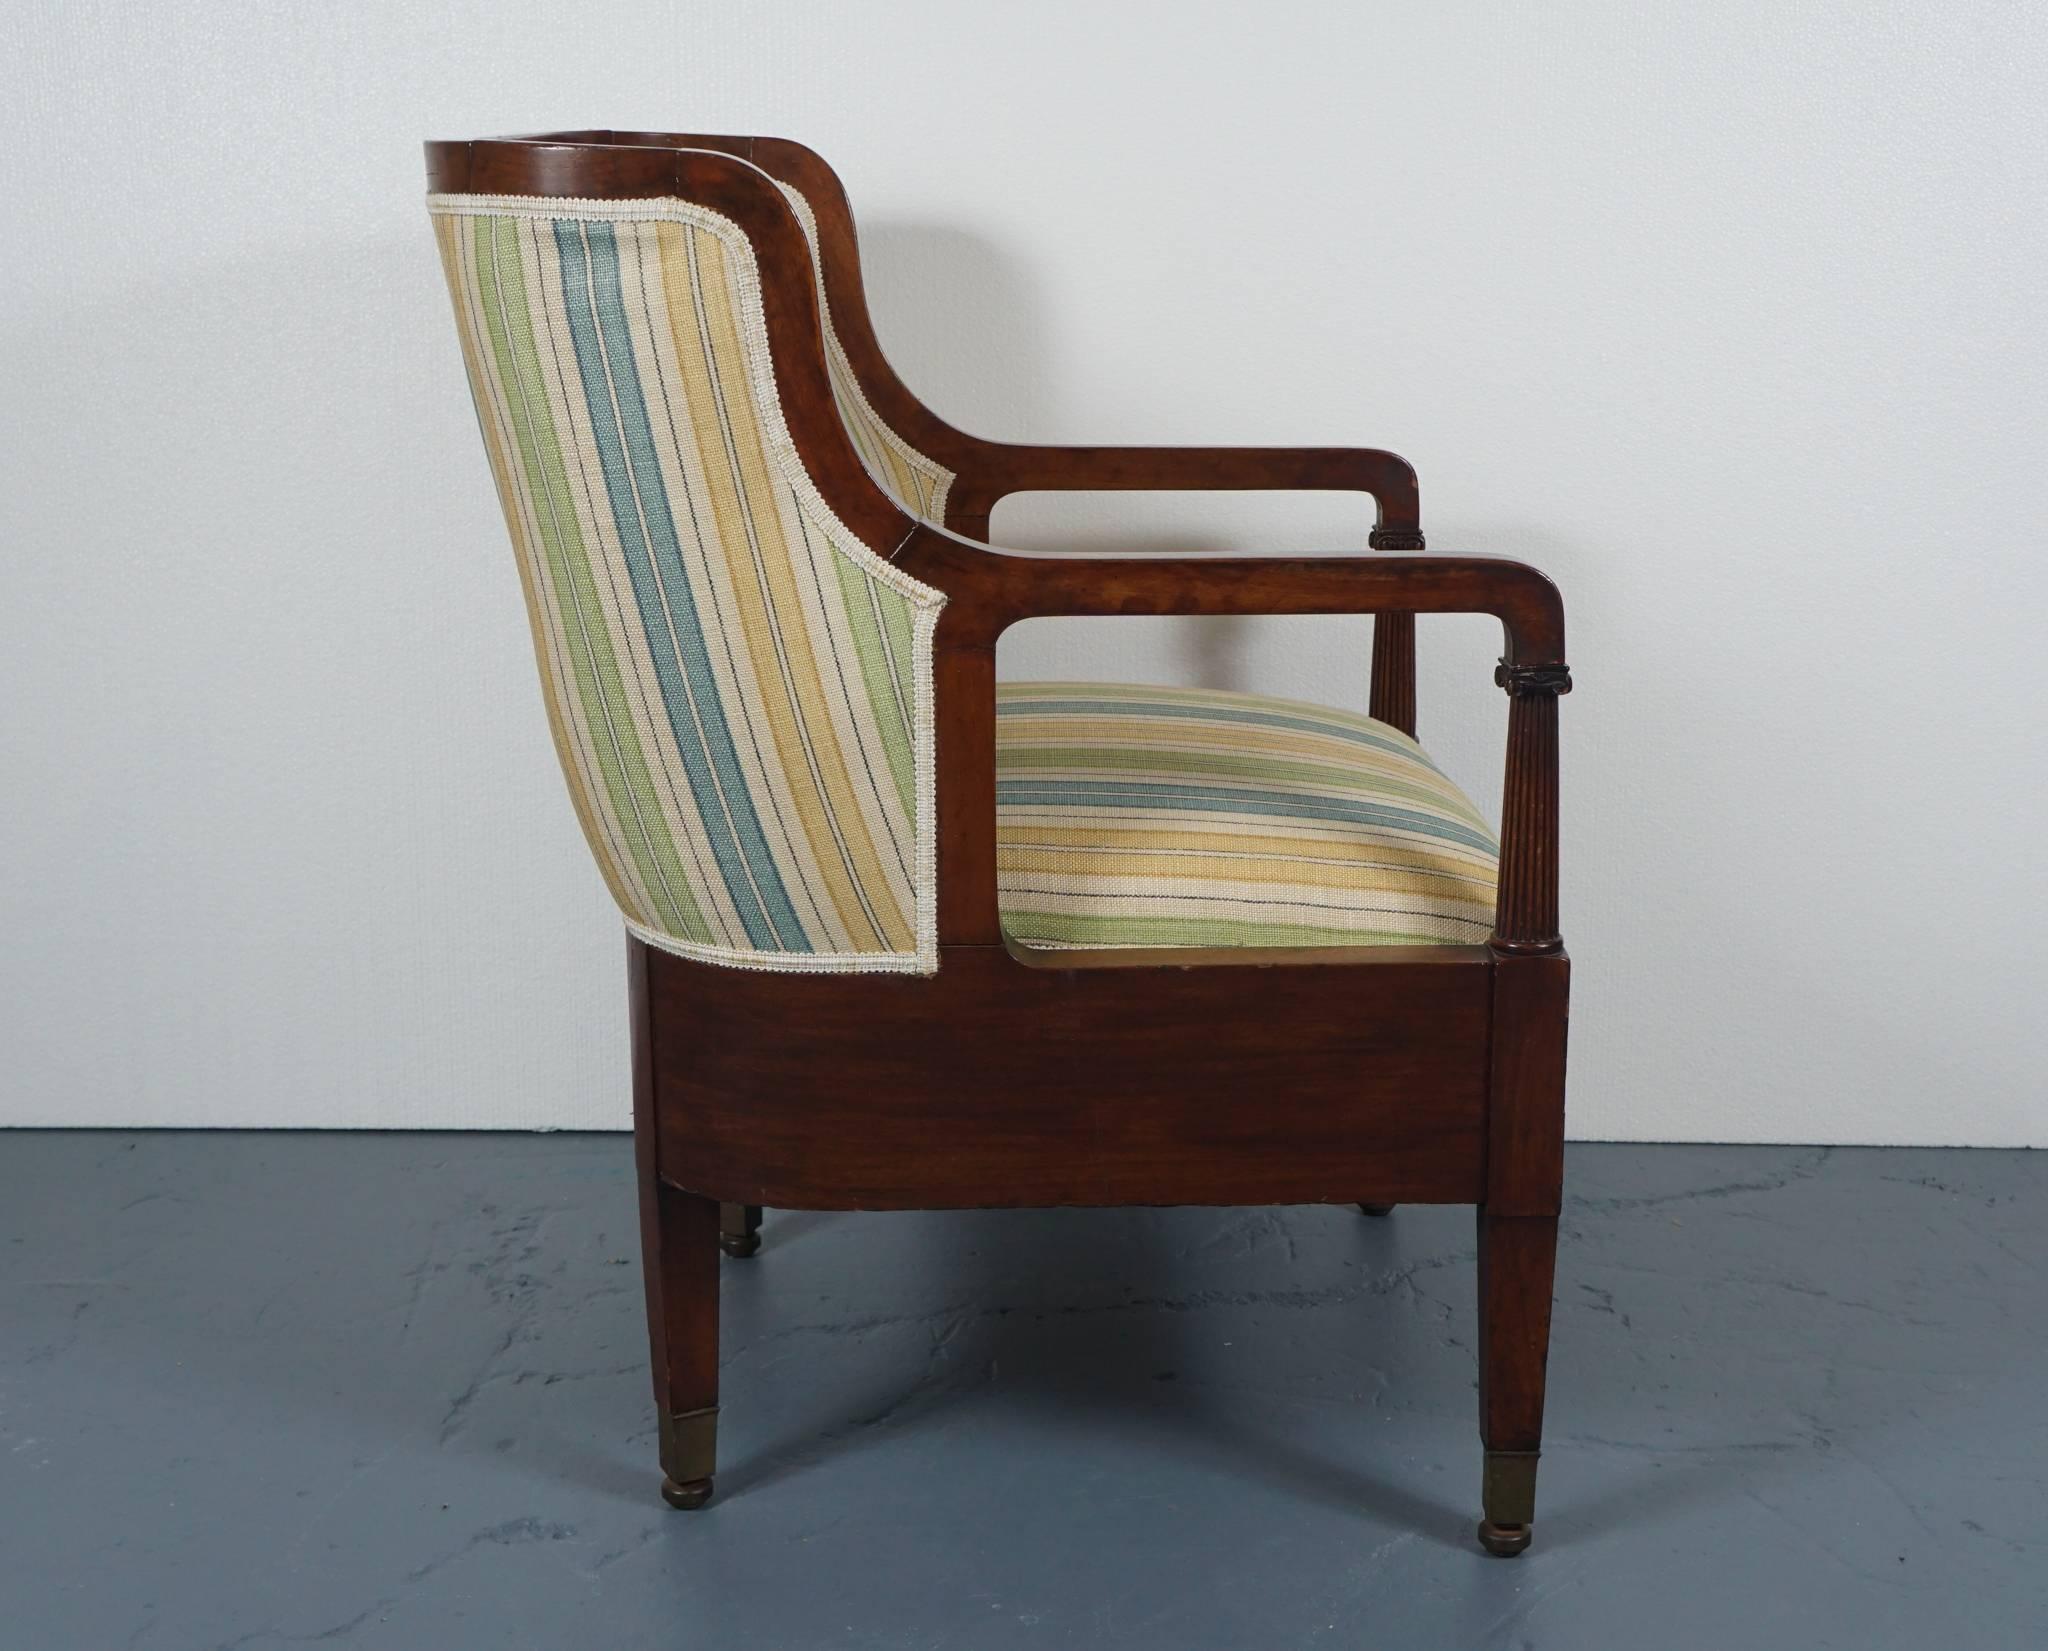 Empire Mahogany Chair in Striped Fabric In Excellent Condition For Sale In Hudson, NY